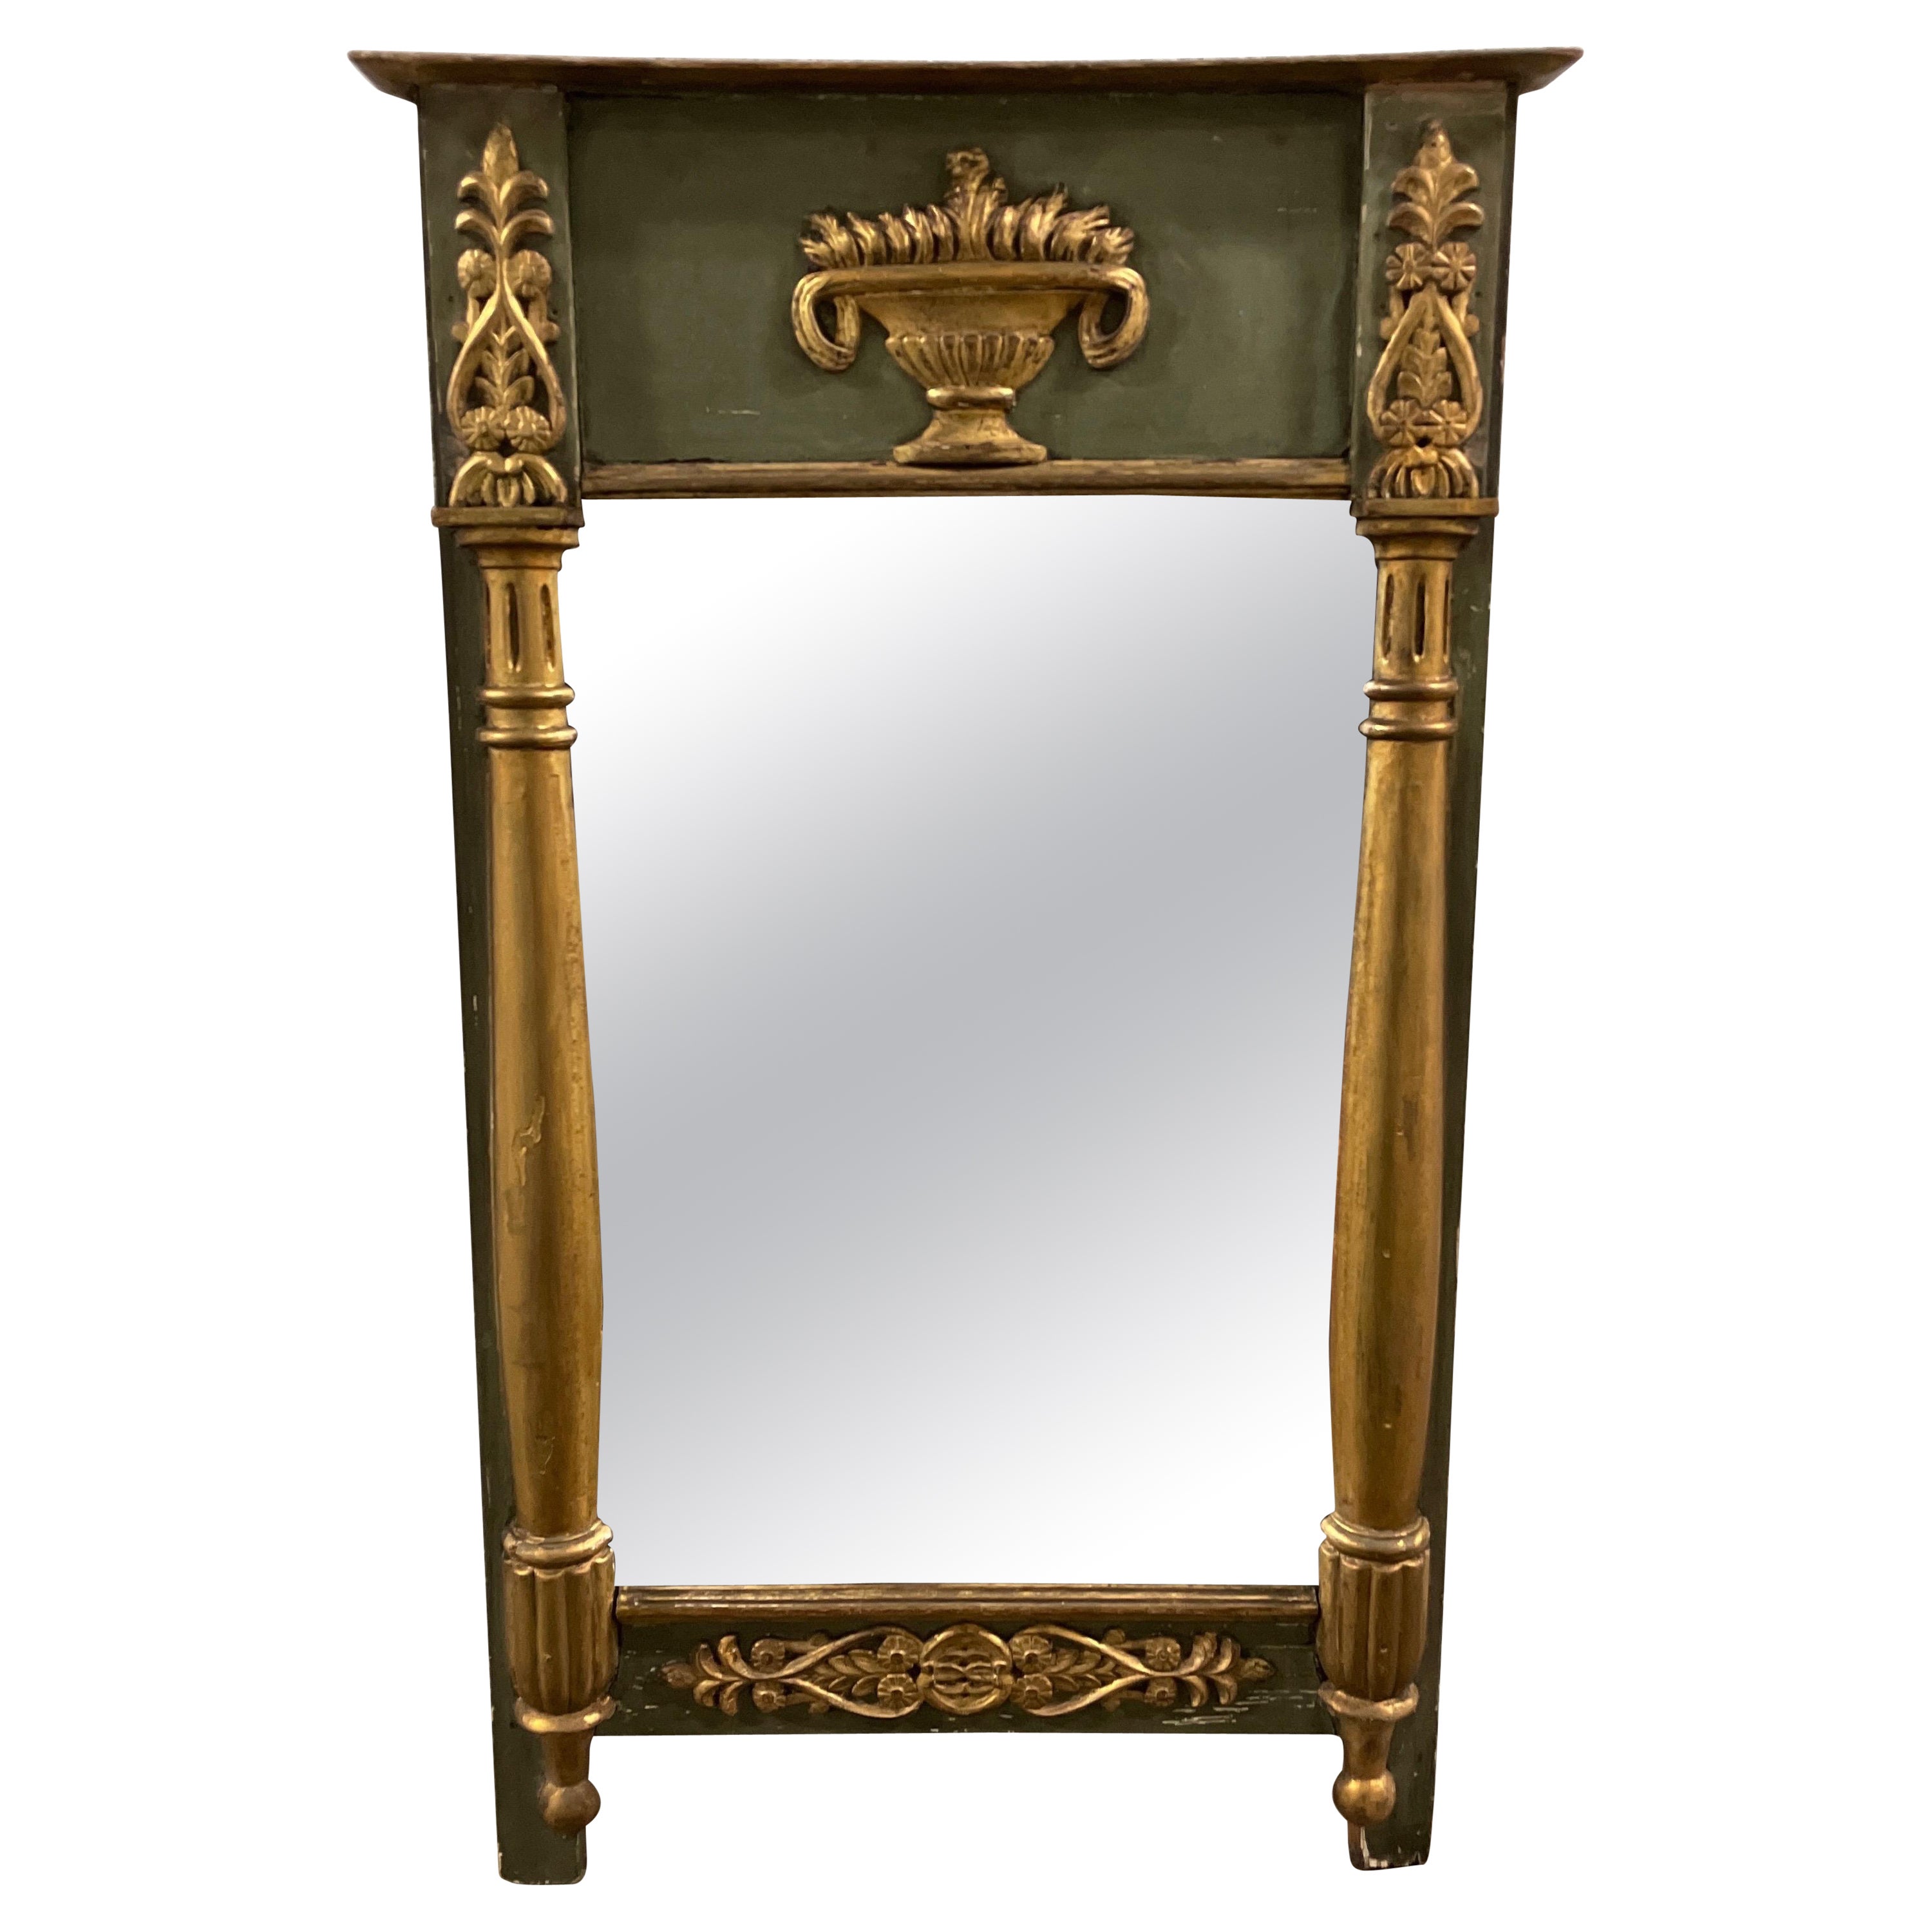 Antique French Empire Painted & Gilded Mirror